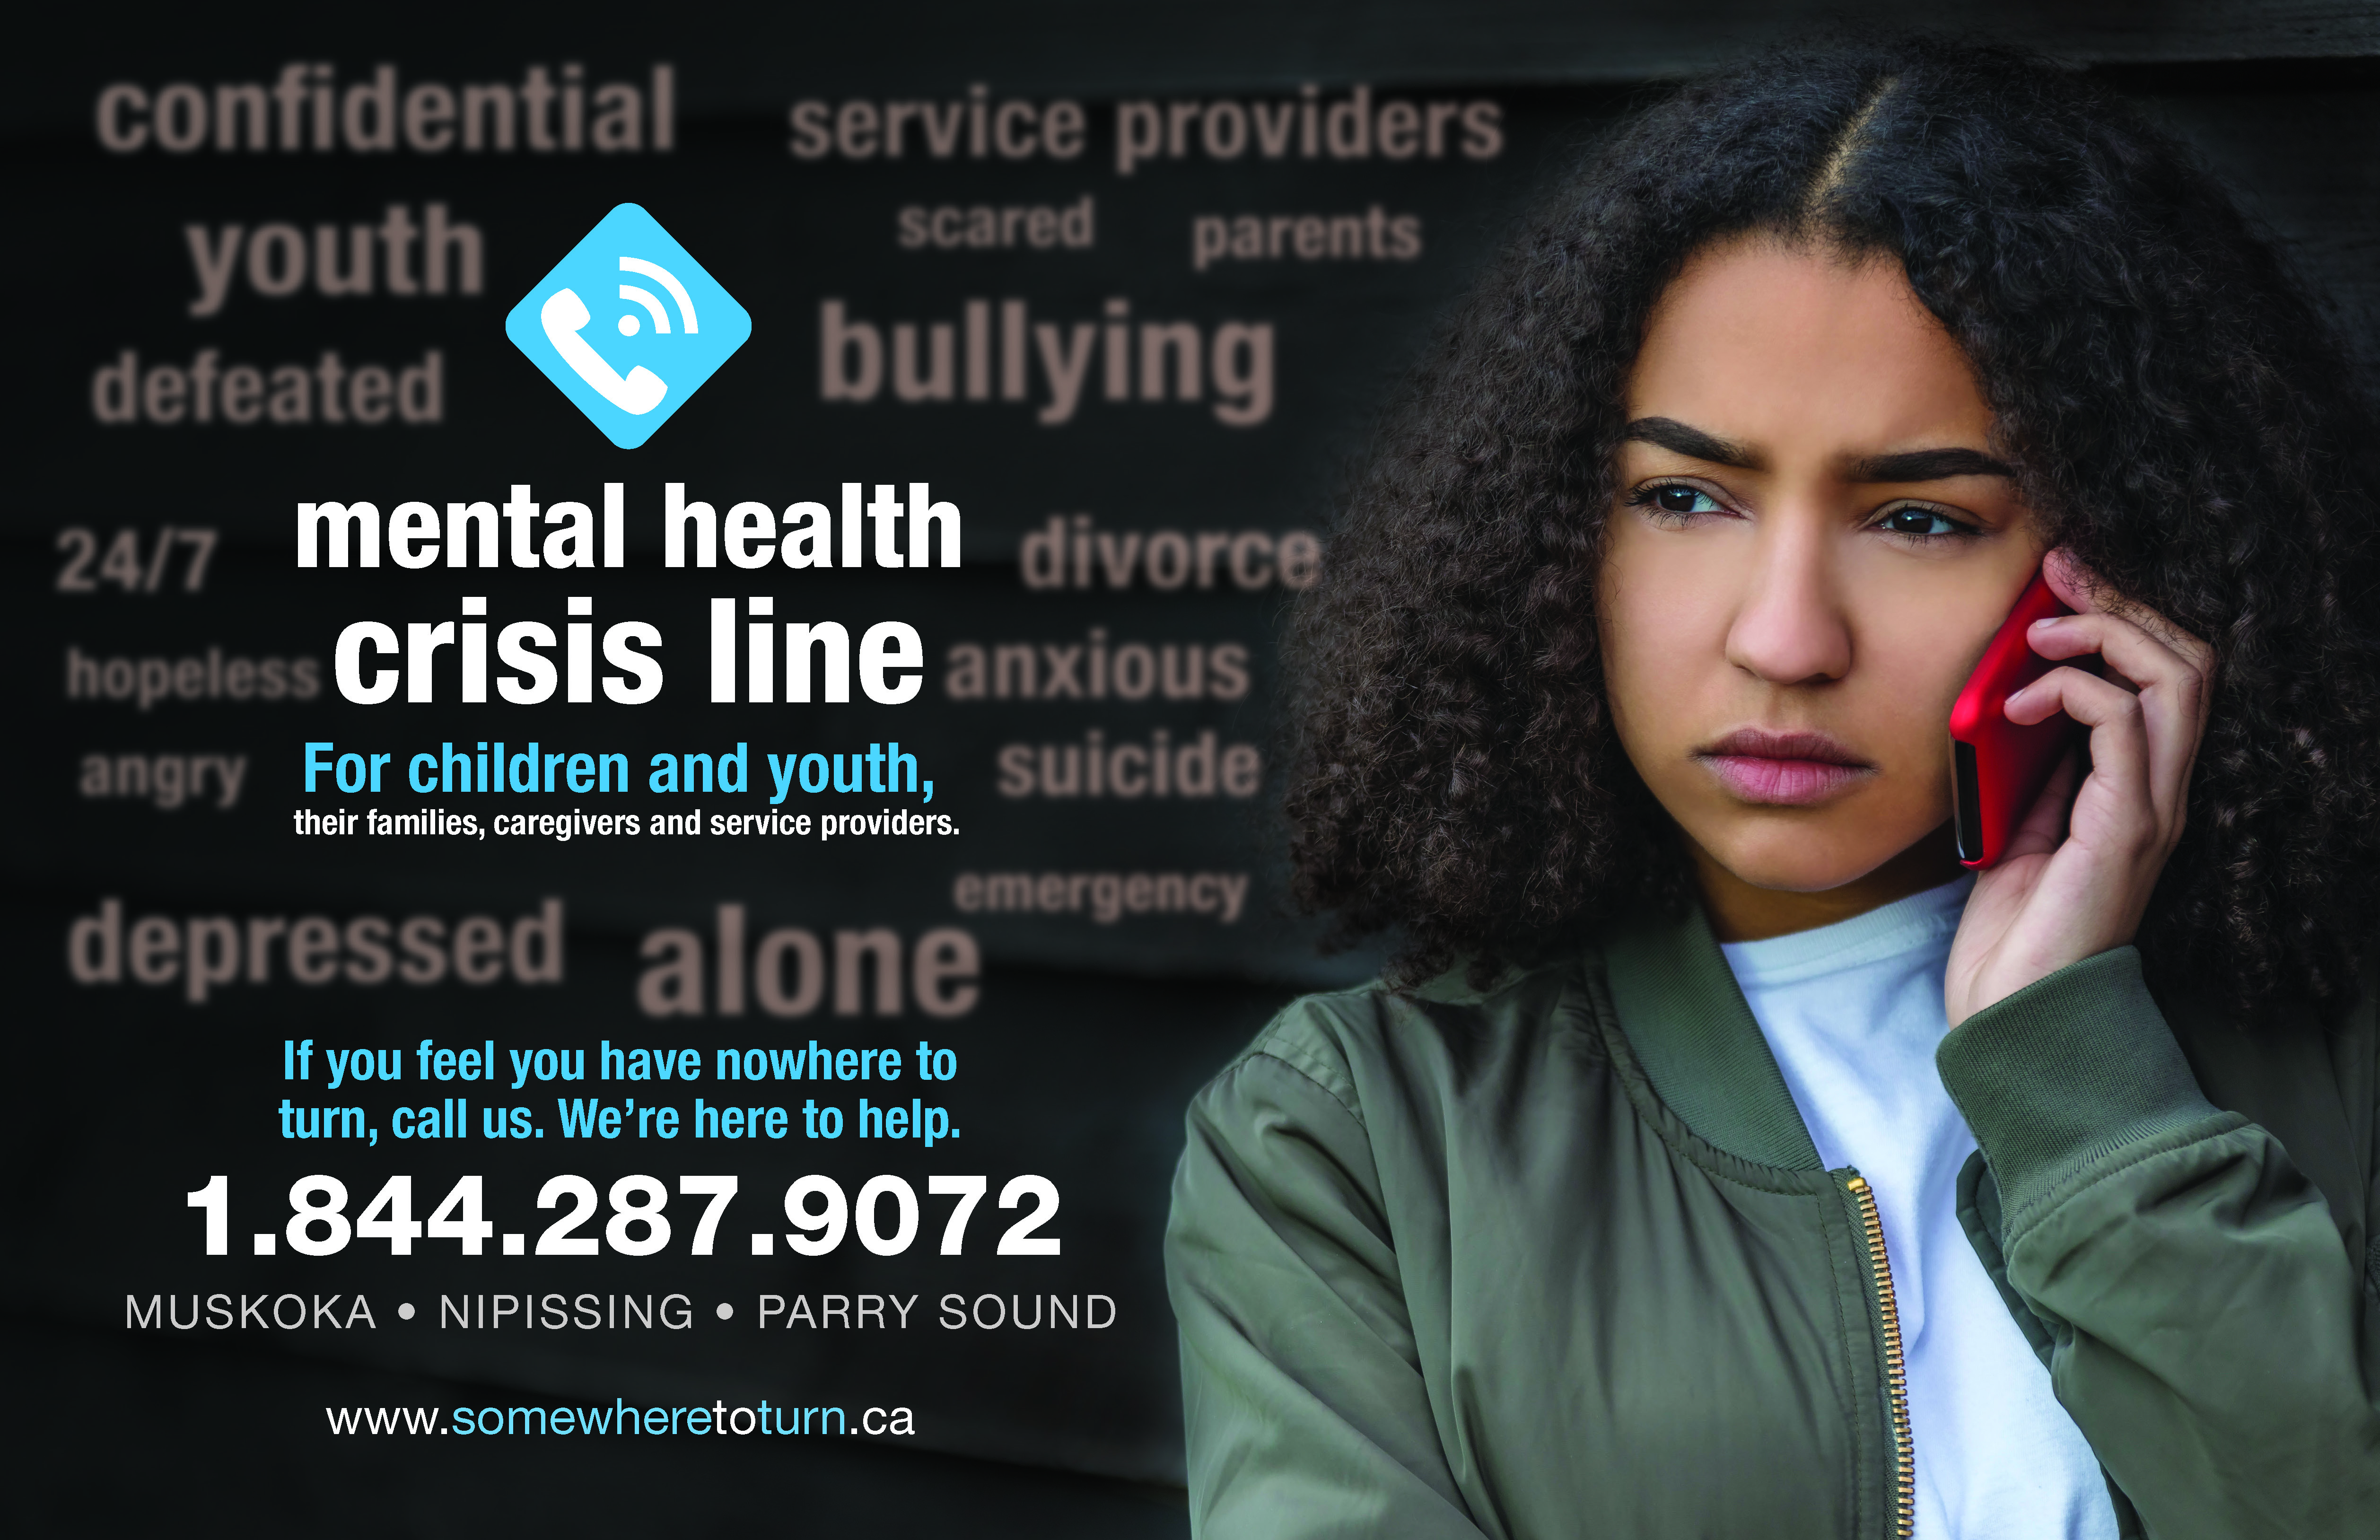 24/7 Mental Health Crisis Line For Children And Youth Launches Across